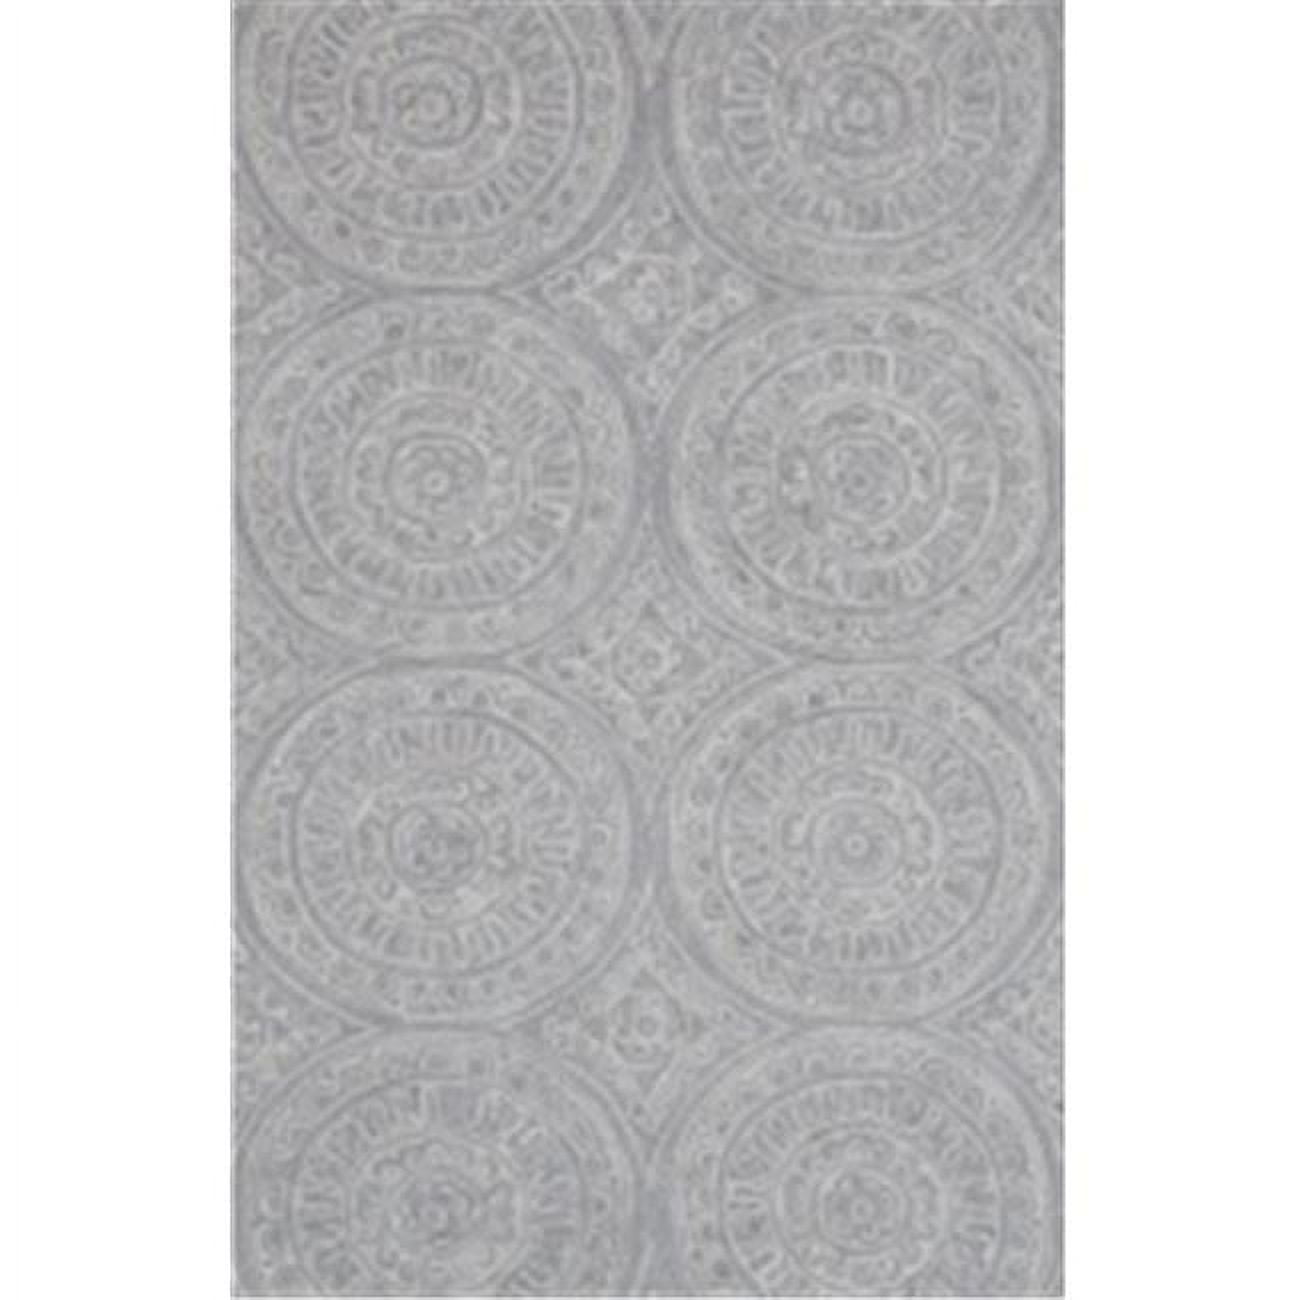 BluePrints Galleria Rugs, Silver - 9.2 x 12.6 in.